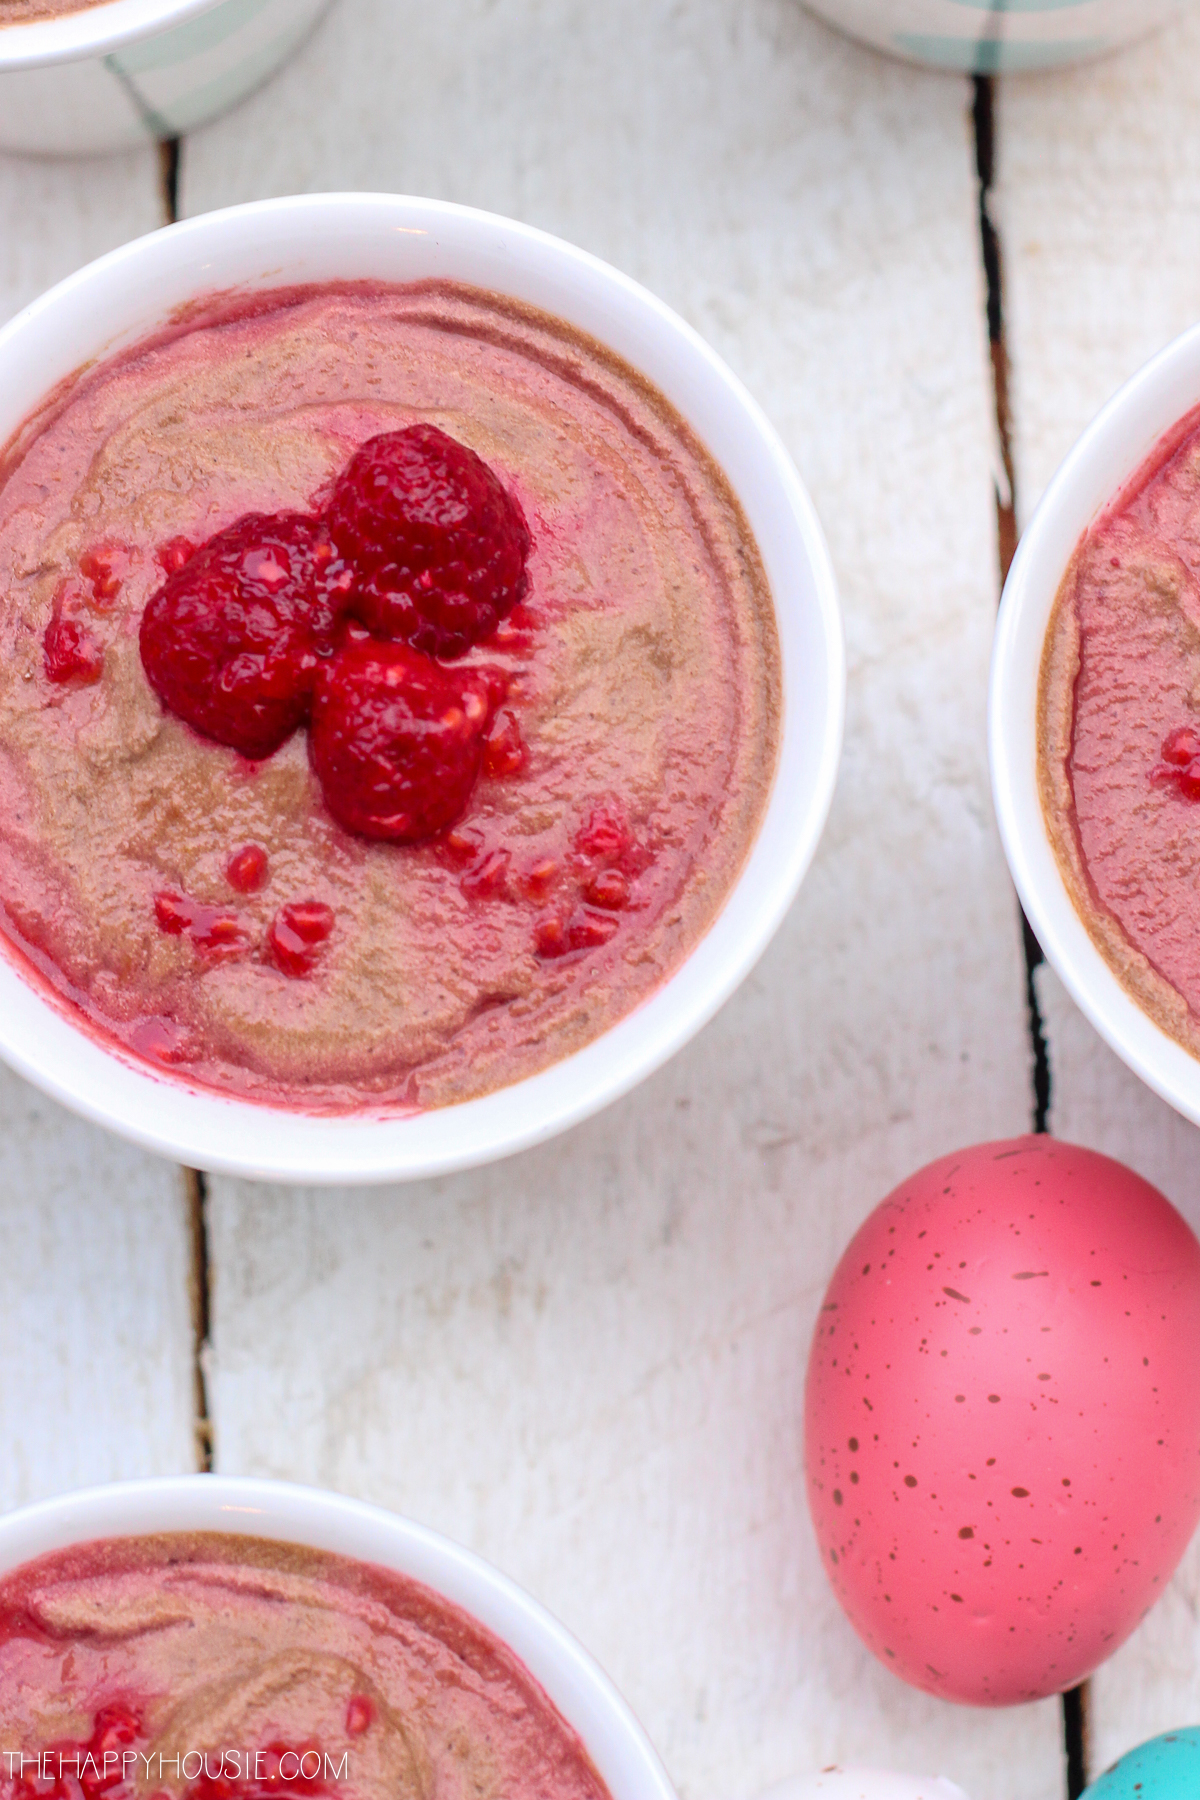 The pinkish dessert in a cup with a dyed pink egg beside it.